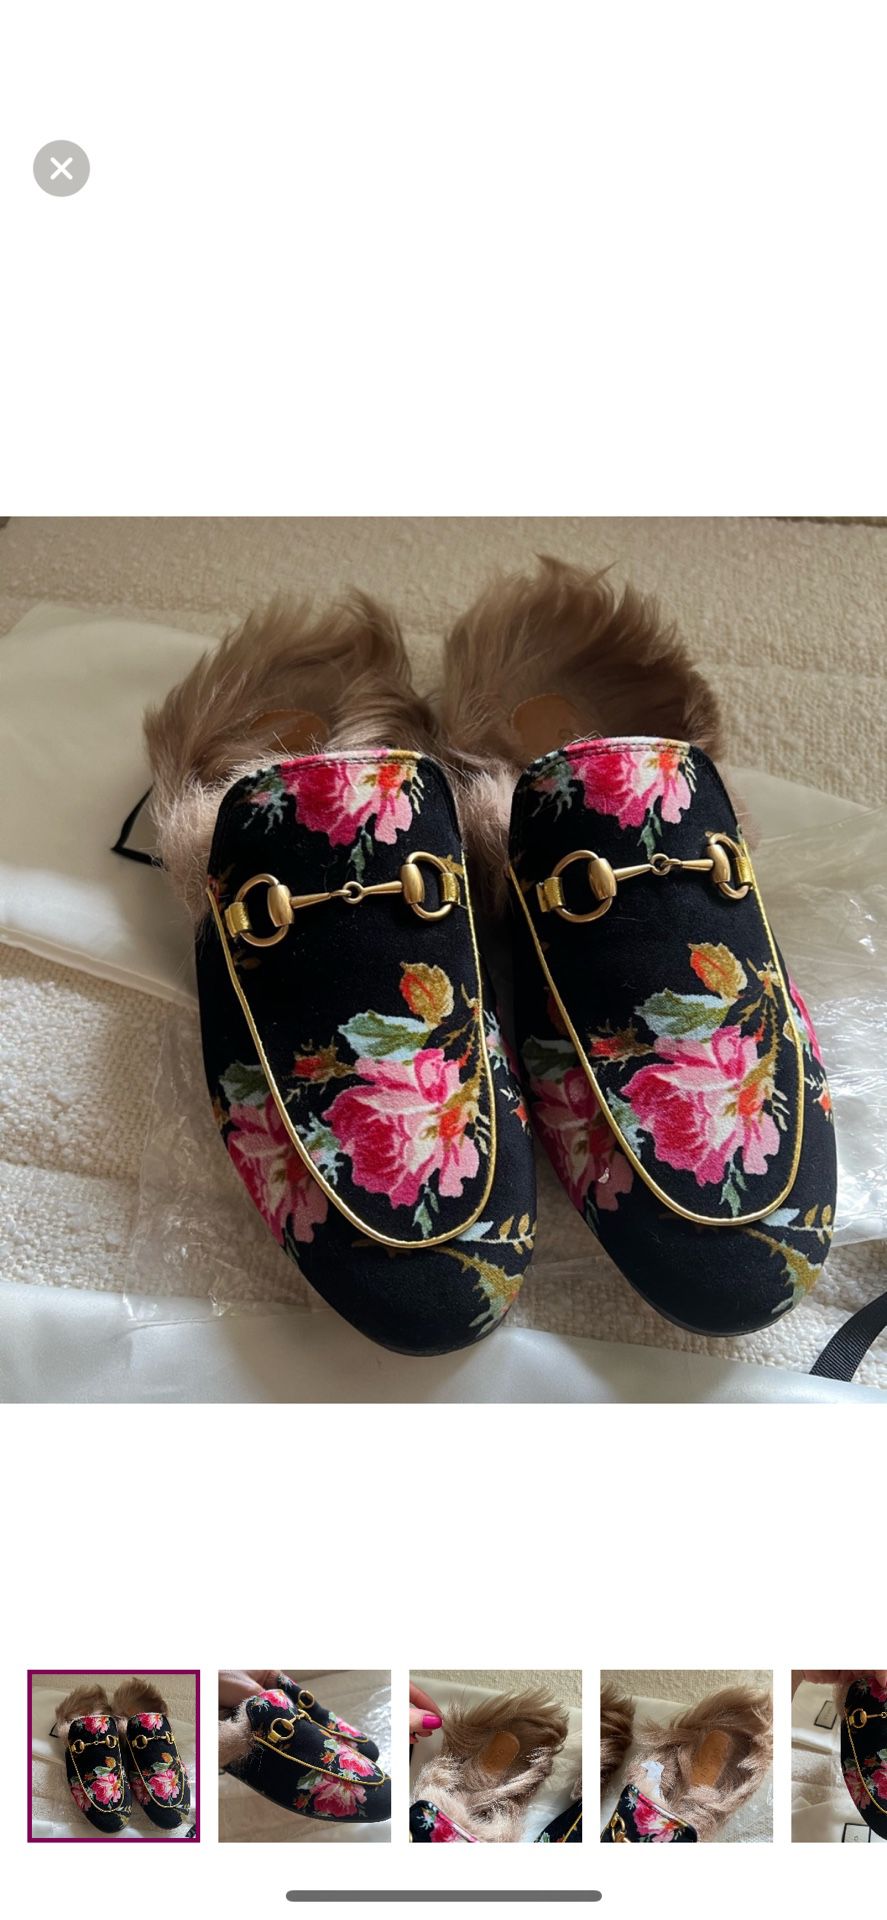 Gucci Princetown Fur Slippers 